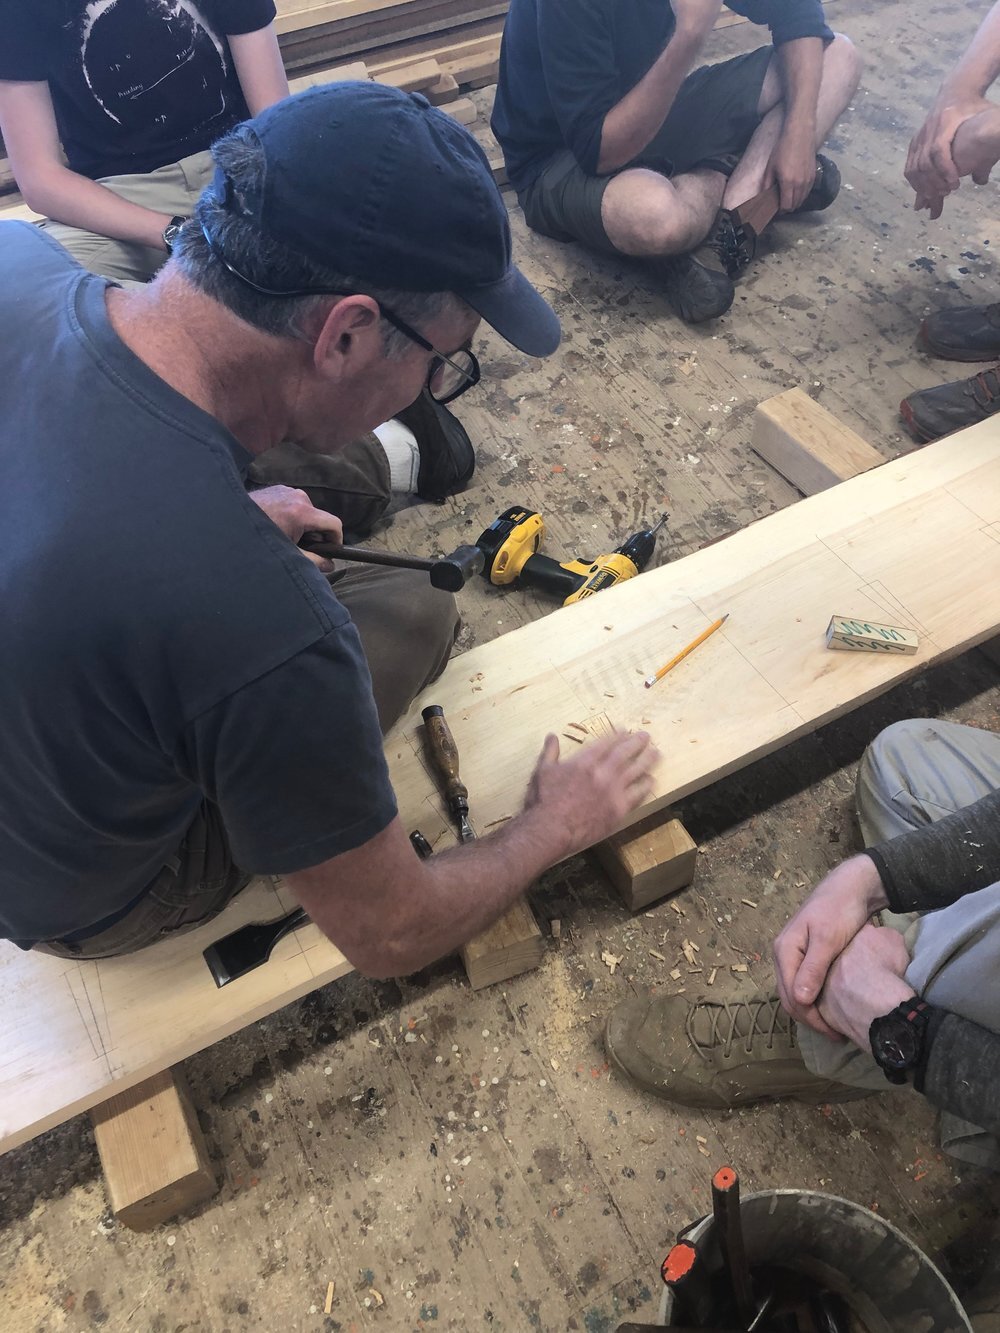  Once the planks are fit, they get edge-nailed together. Holes are chiseled into both planks and mortises are cut into one of the sides of the planks to receive the nail heads. Here you can see Douglas laying out the mortises to be chiseled. 